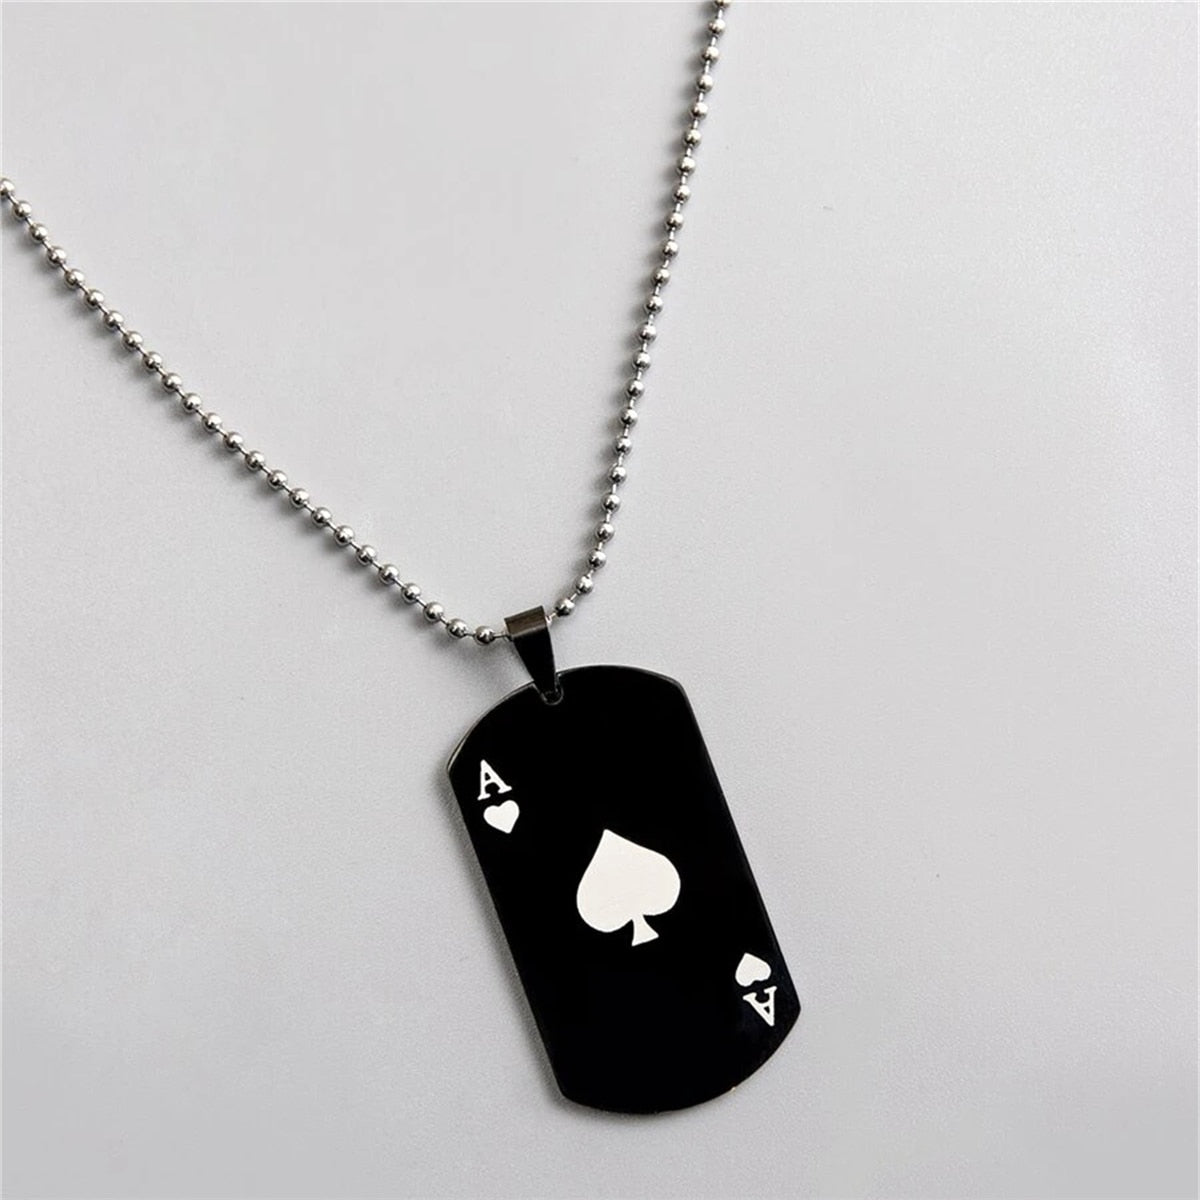 Ace of Spades plated Necklace